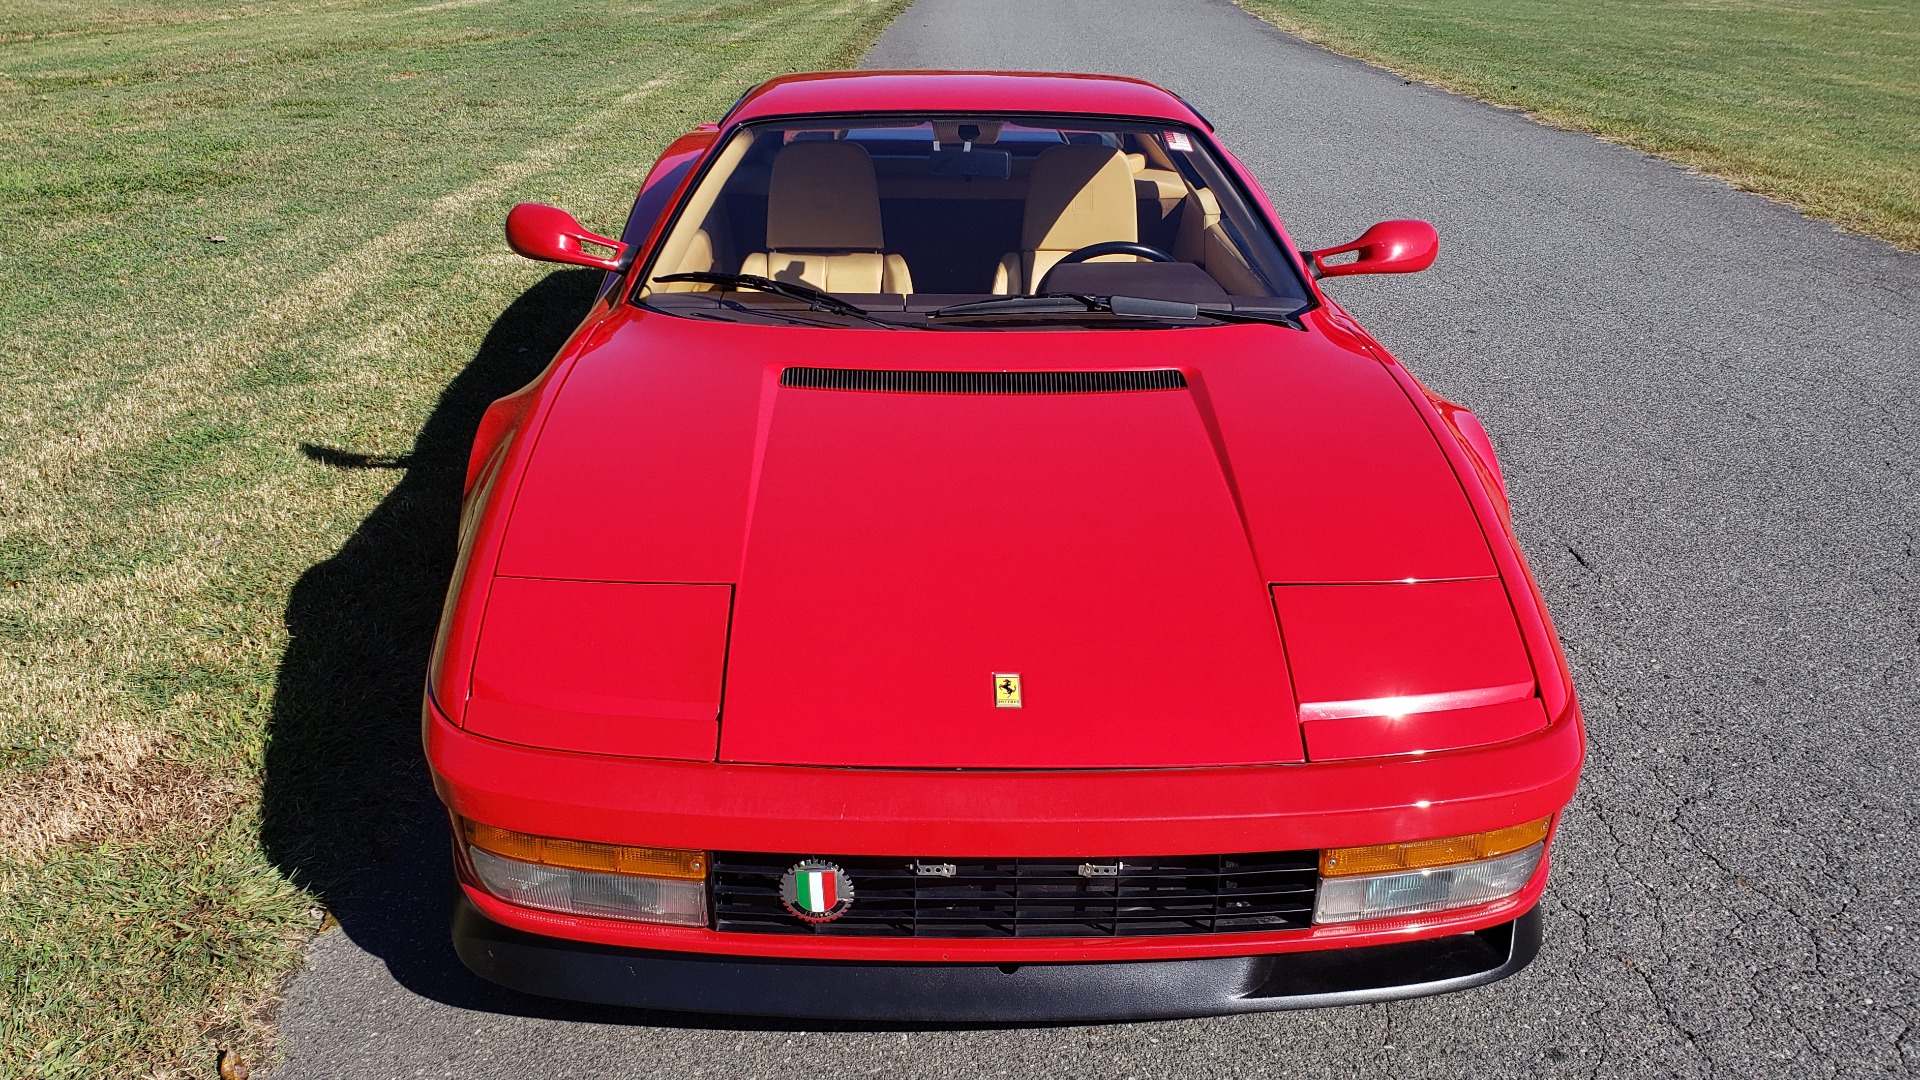 Used 1988 Ferrari TESTAROSSA COUPE / 4.9L FLAT-12 / 5-SPEED MANUAL / LOW MILES SUPER CLEAN for sale Sold at Formula Imports in Charlotte NC 28227 26